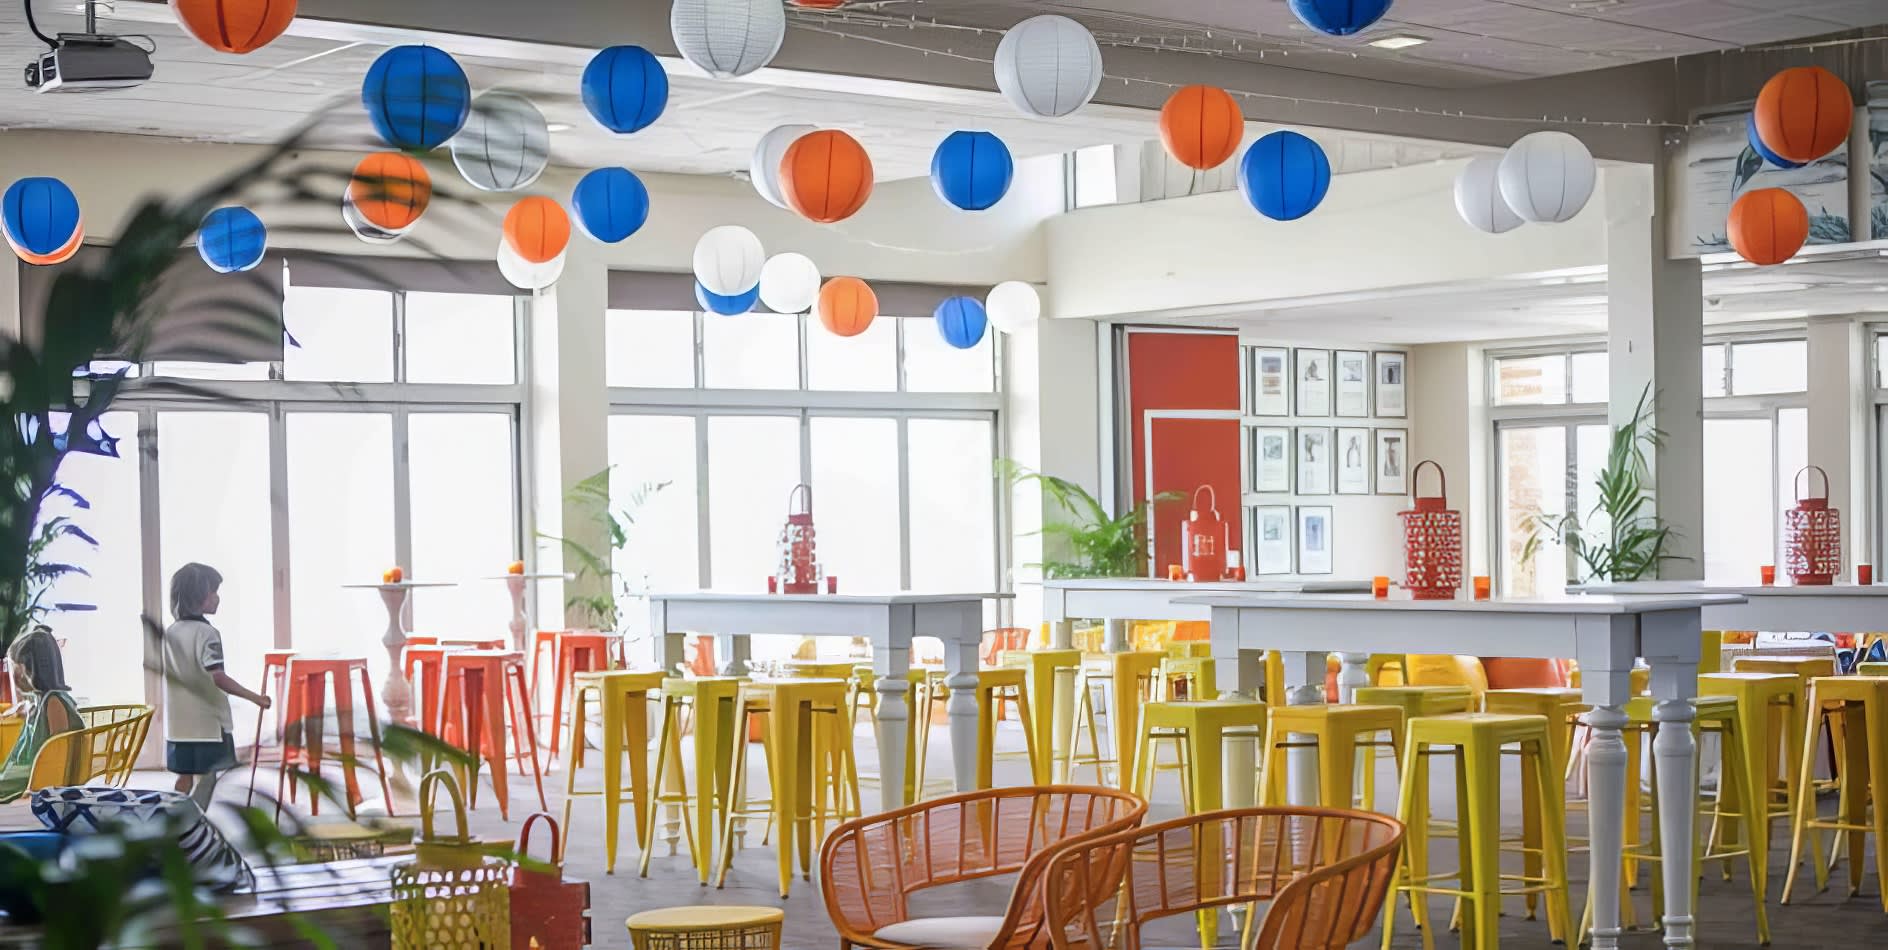 A room filled with orange Tolix stools and colorful balloons.